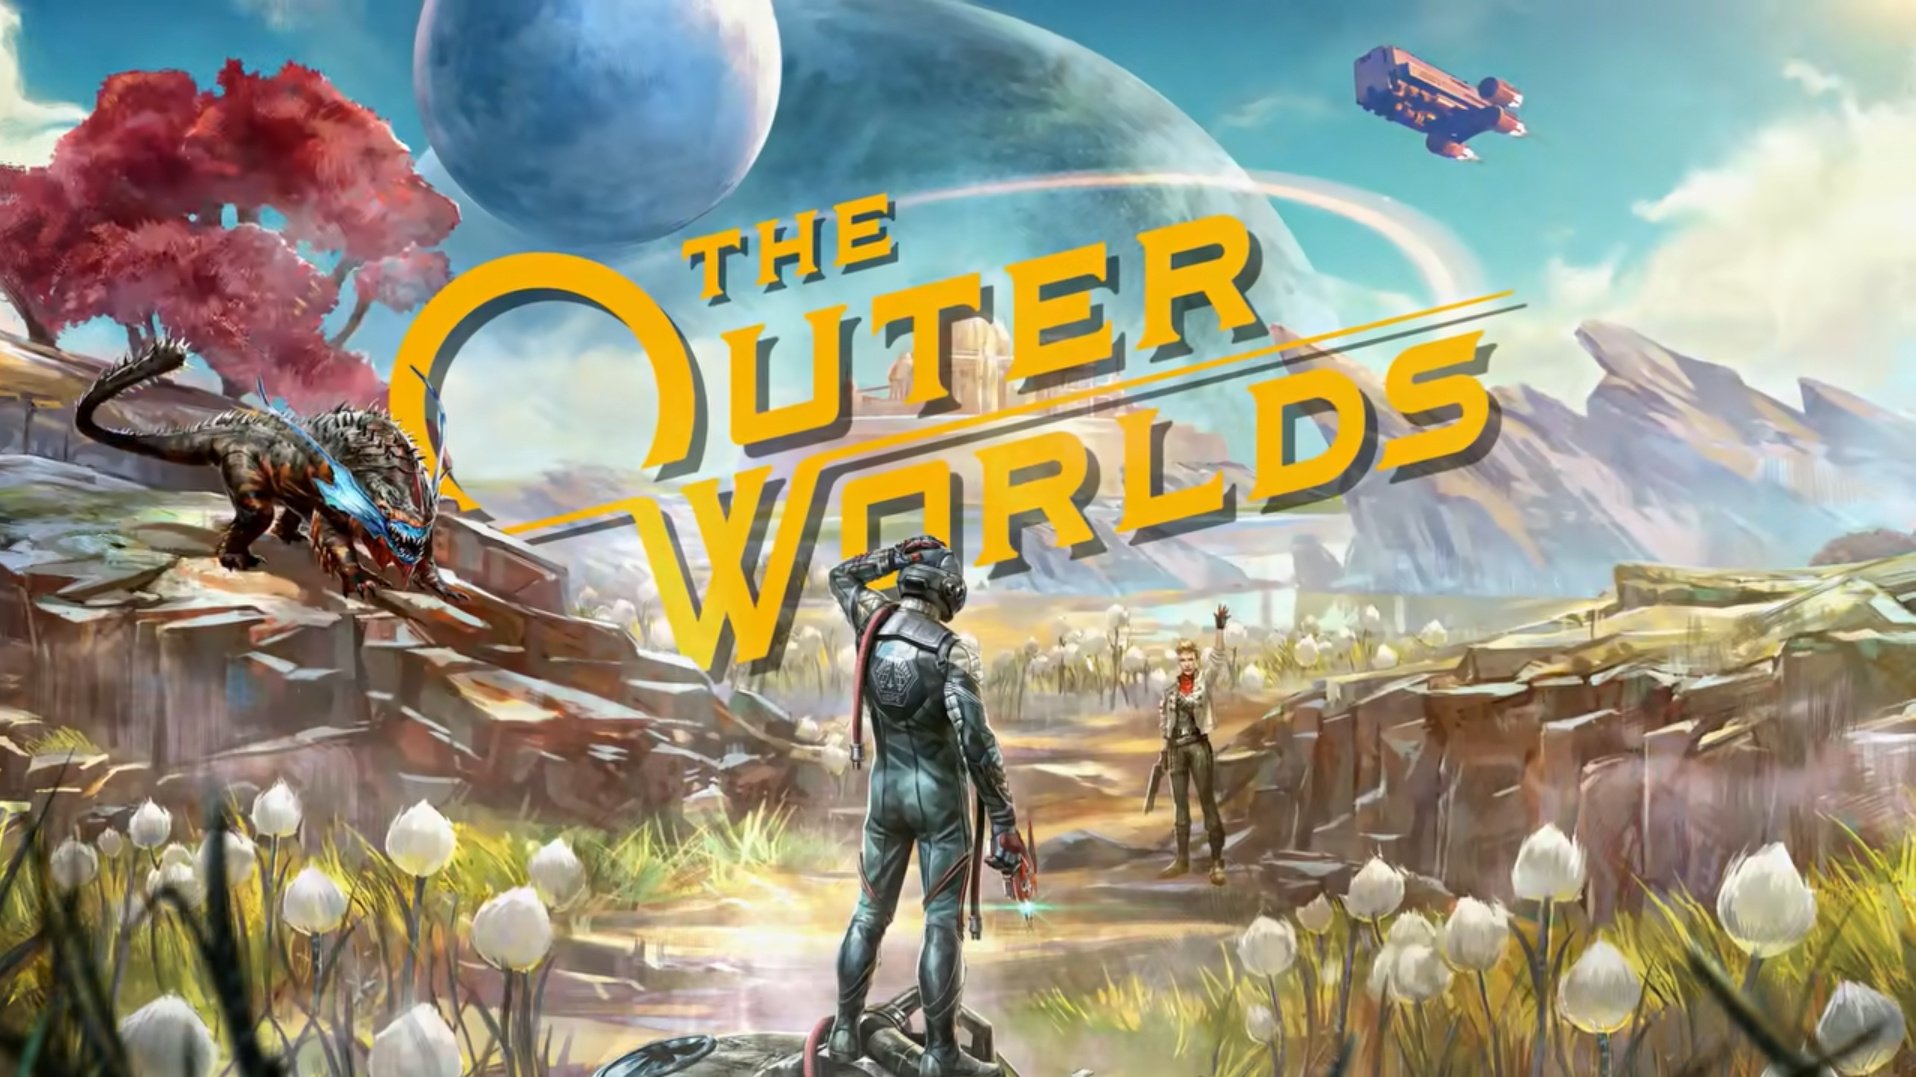 The Outer Worlds is coming to Switch in early 2020